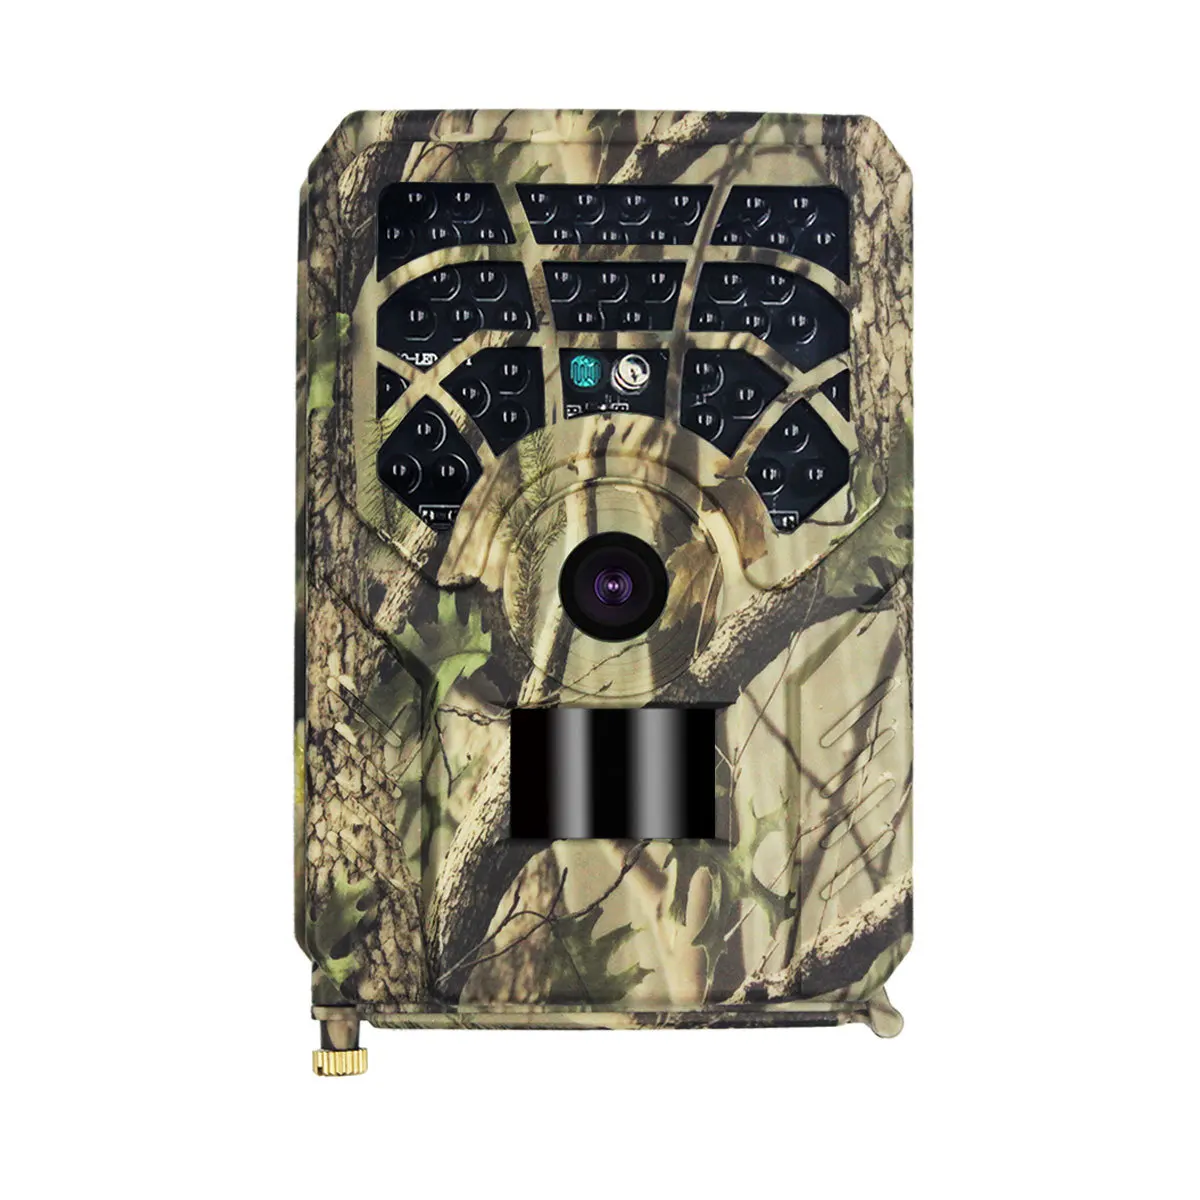 0.8S 12MP PR300A Hunting Camera Camouflage Trail Cam Camcorder IP56 Waterproof 